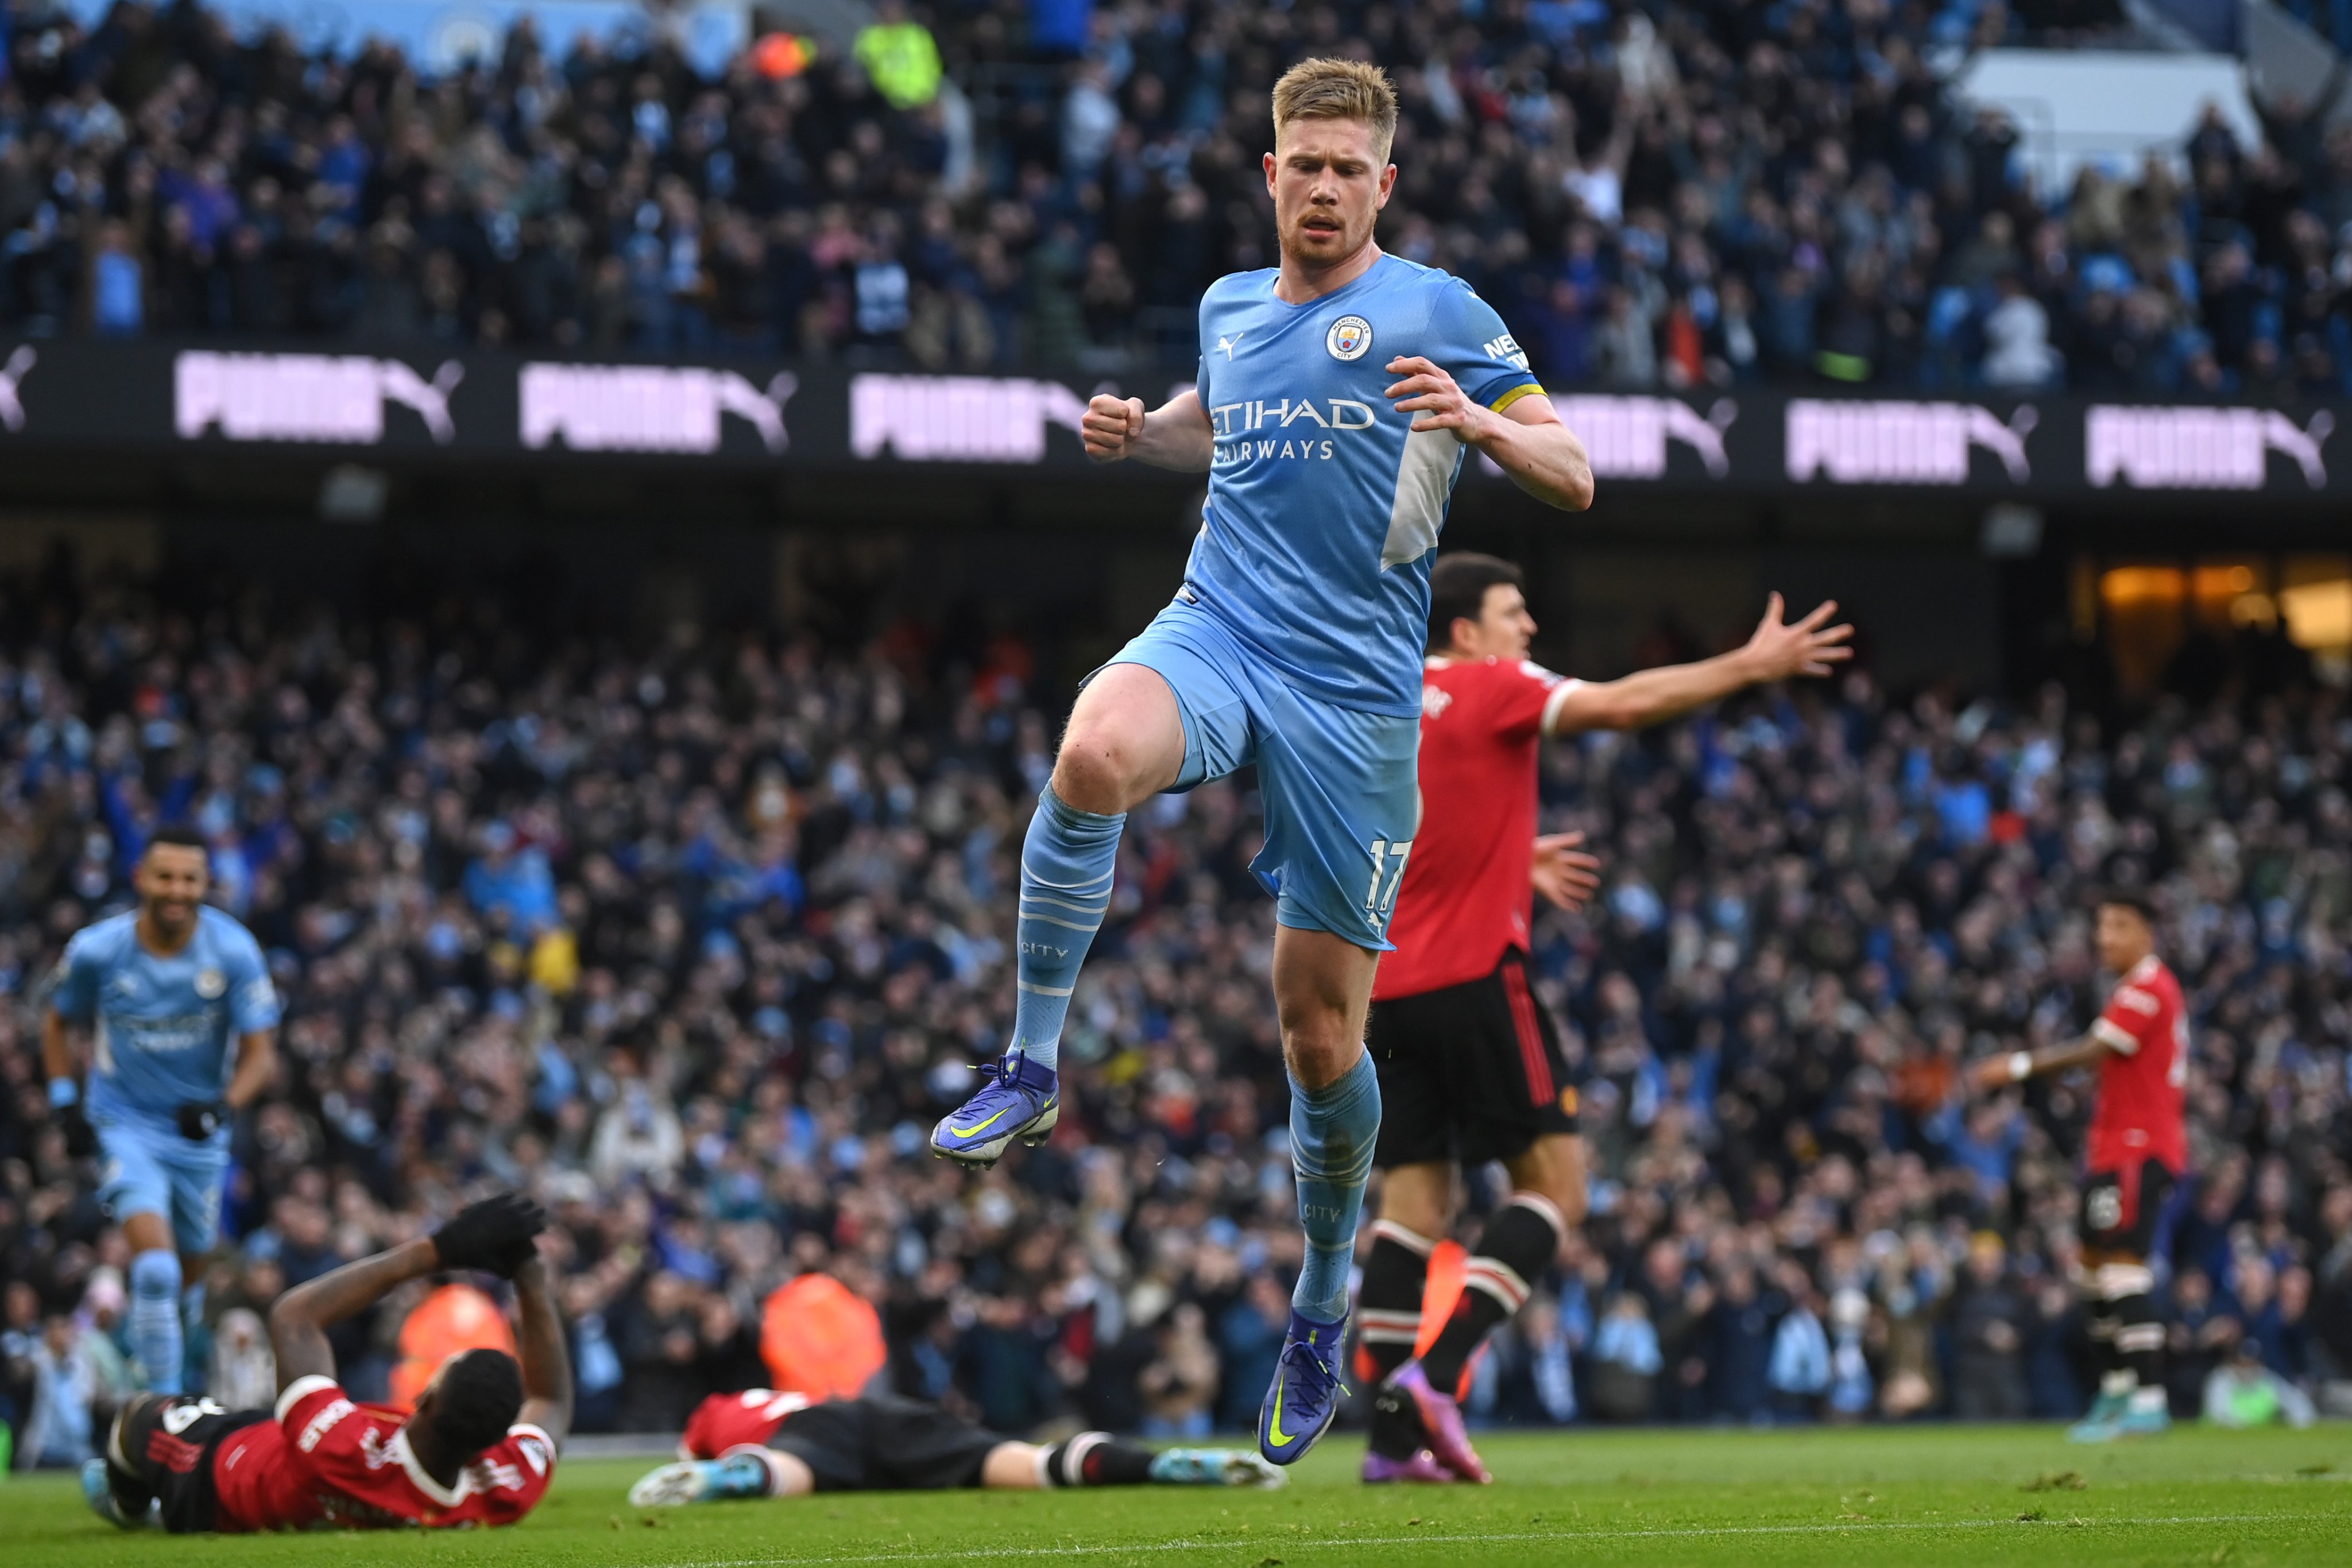 Manchester City 4-1 Manchester United: Man United's fightback washed away by dominant Man City who extend their lead to six points as 'Manchester is Blue'